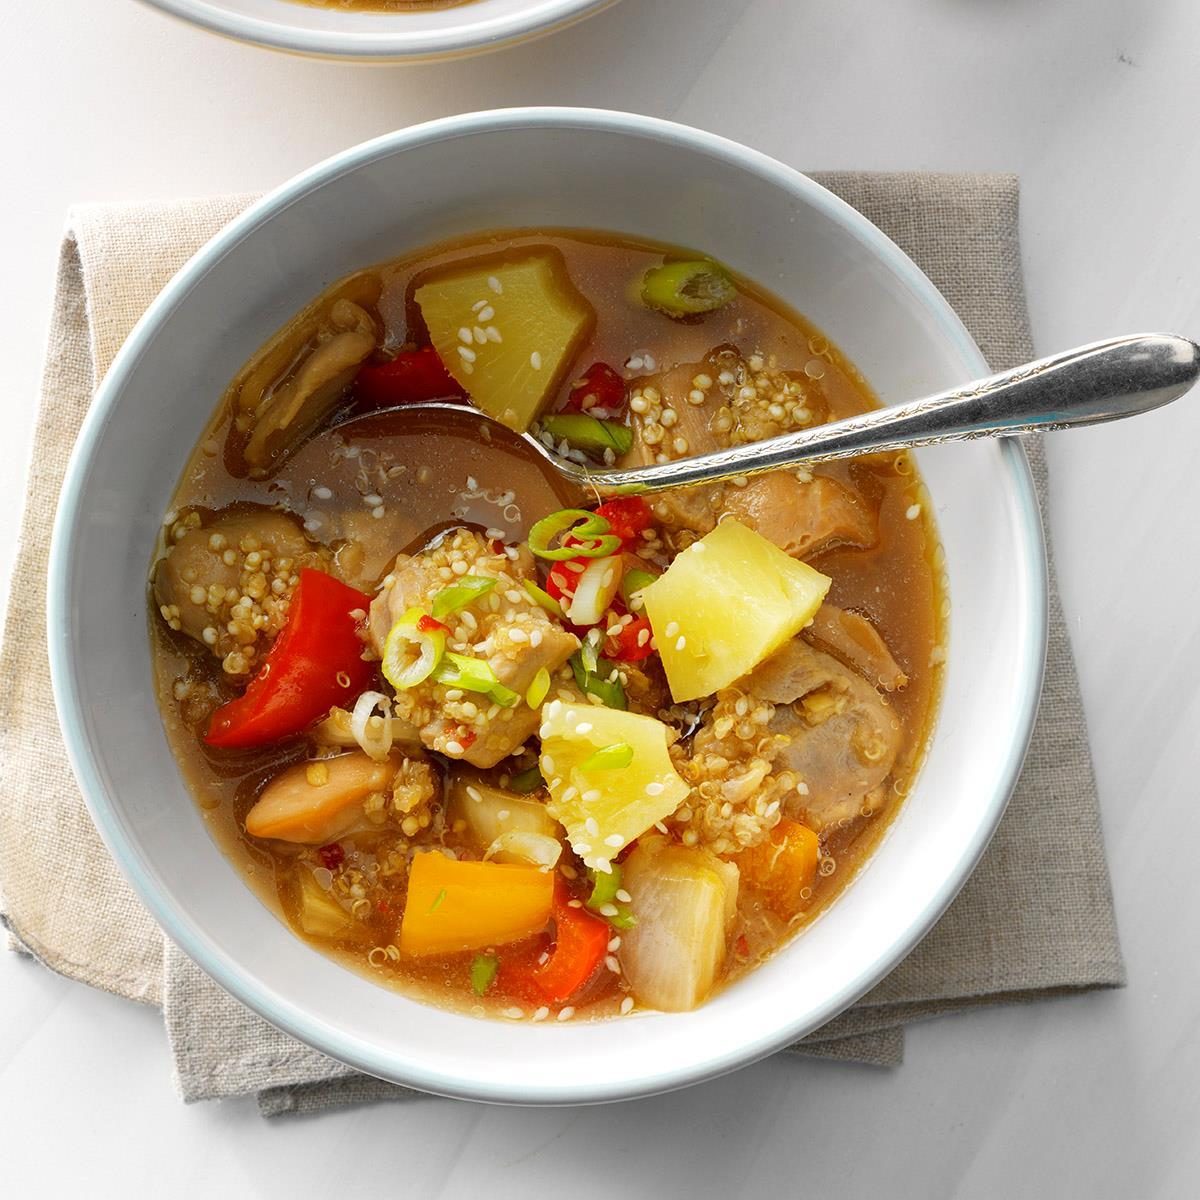 Ginger Chicken And Quinoa Stew Exps Sdfm19 232492 B10 10 1b 1